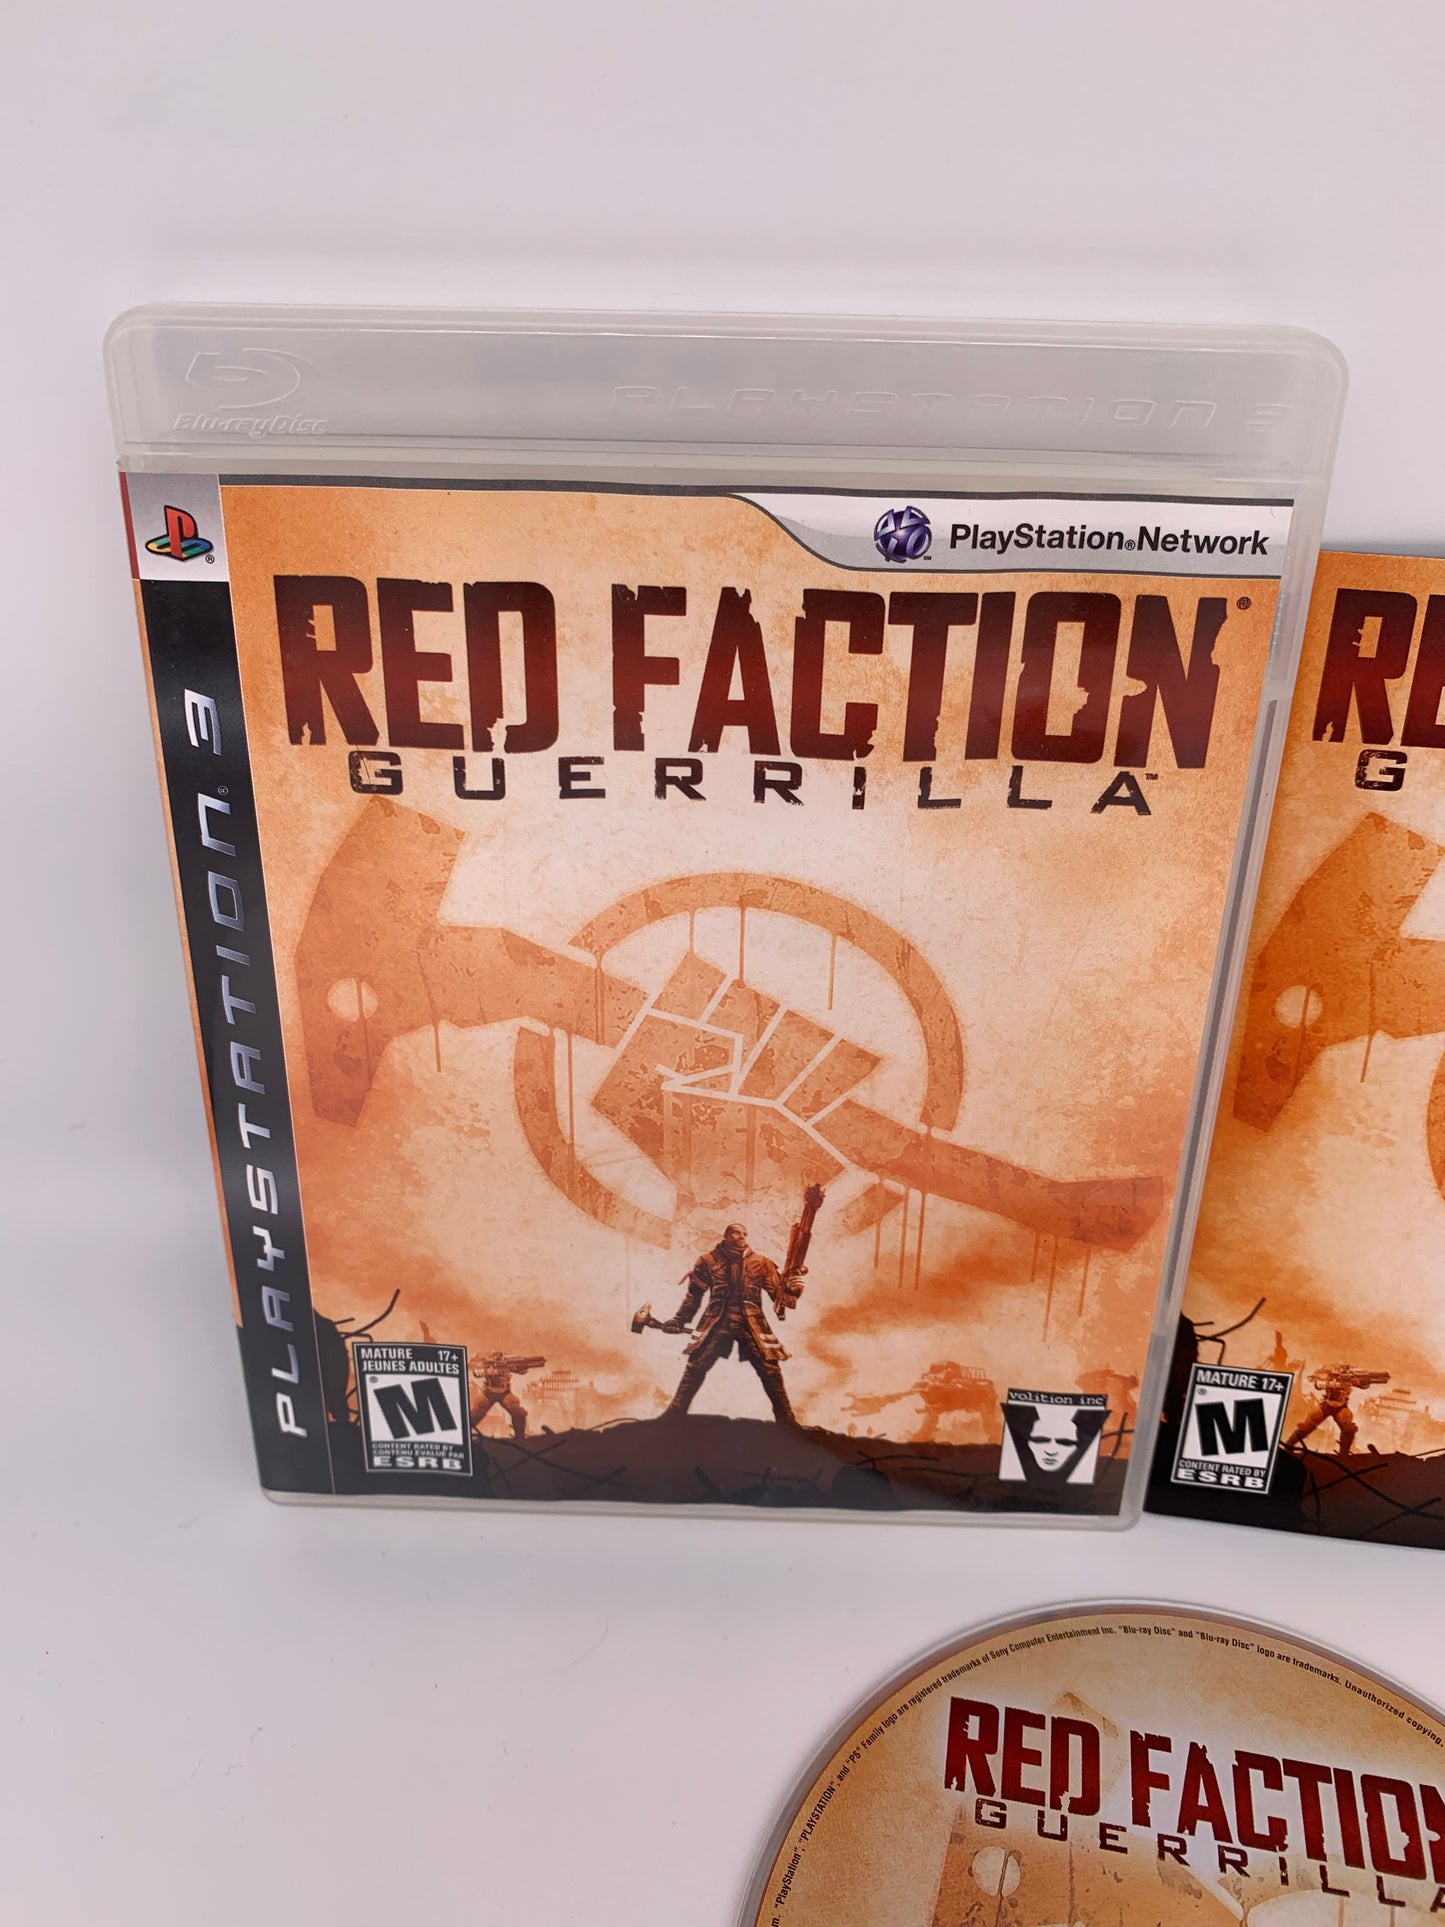 SONY PLAYSTATiON 3 [PS3] | RED FACTiON GUERRiLLA